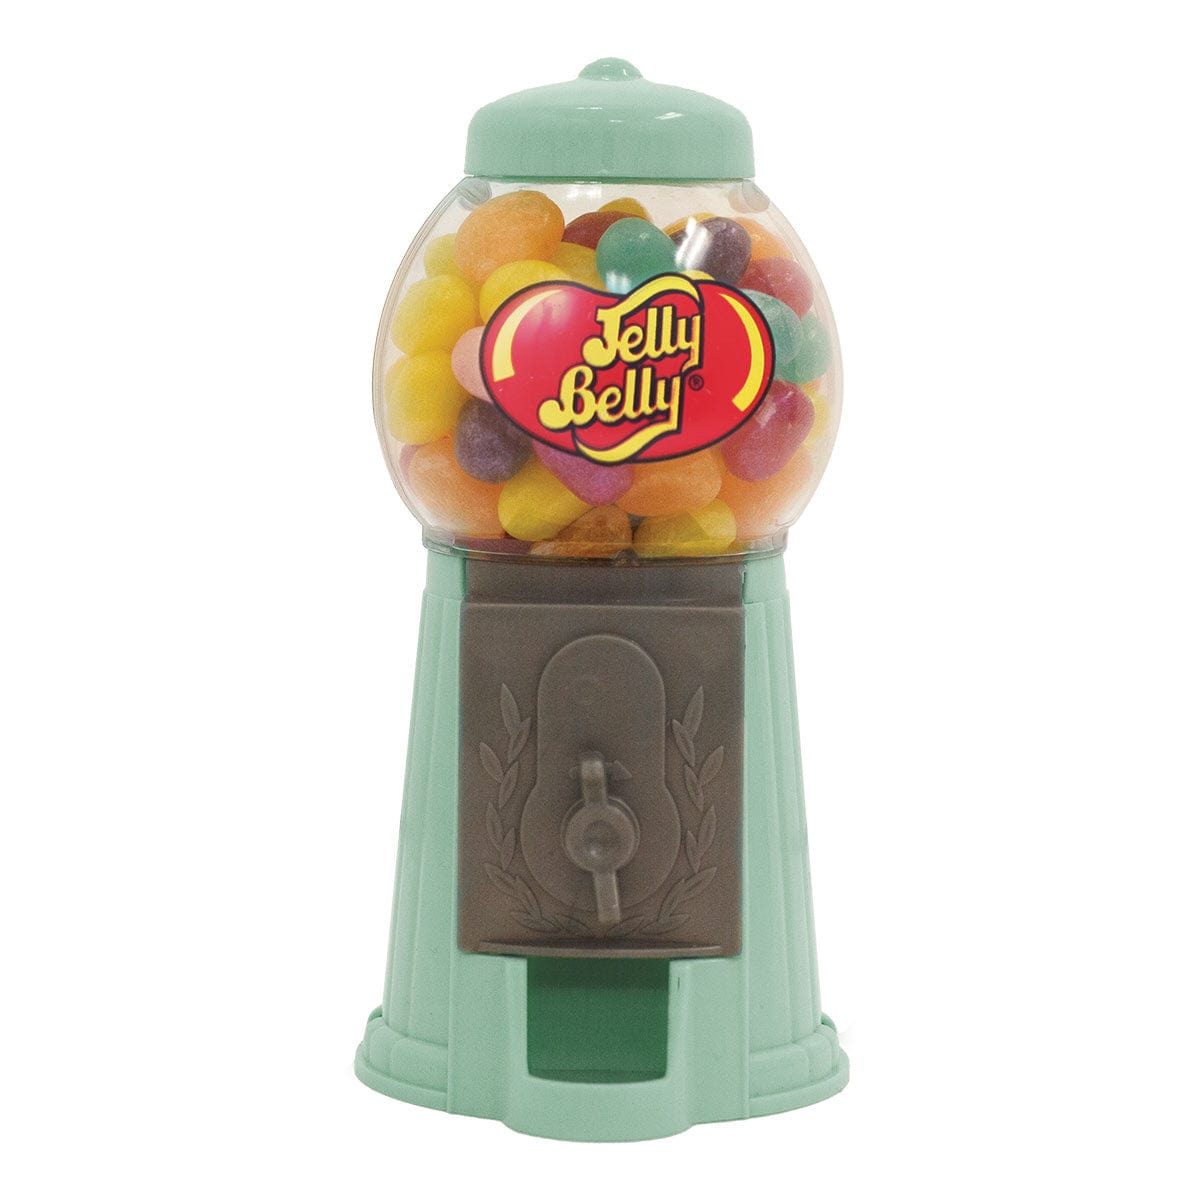 Jelly Belly Jelly Belly Pastel Tiny Bean Machine